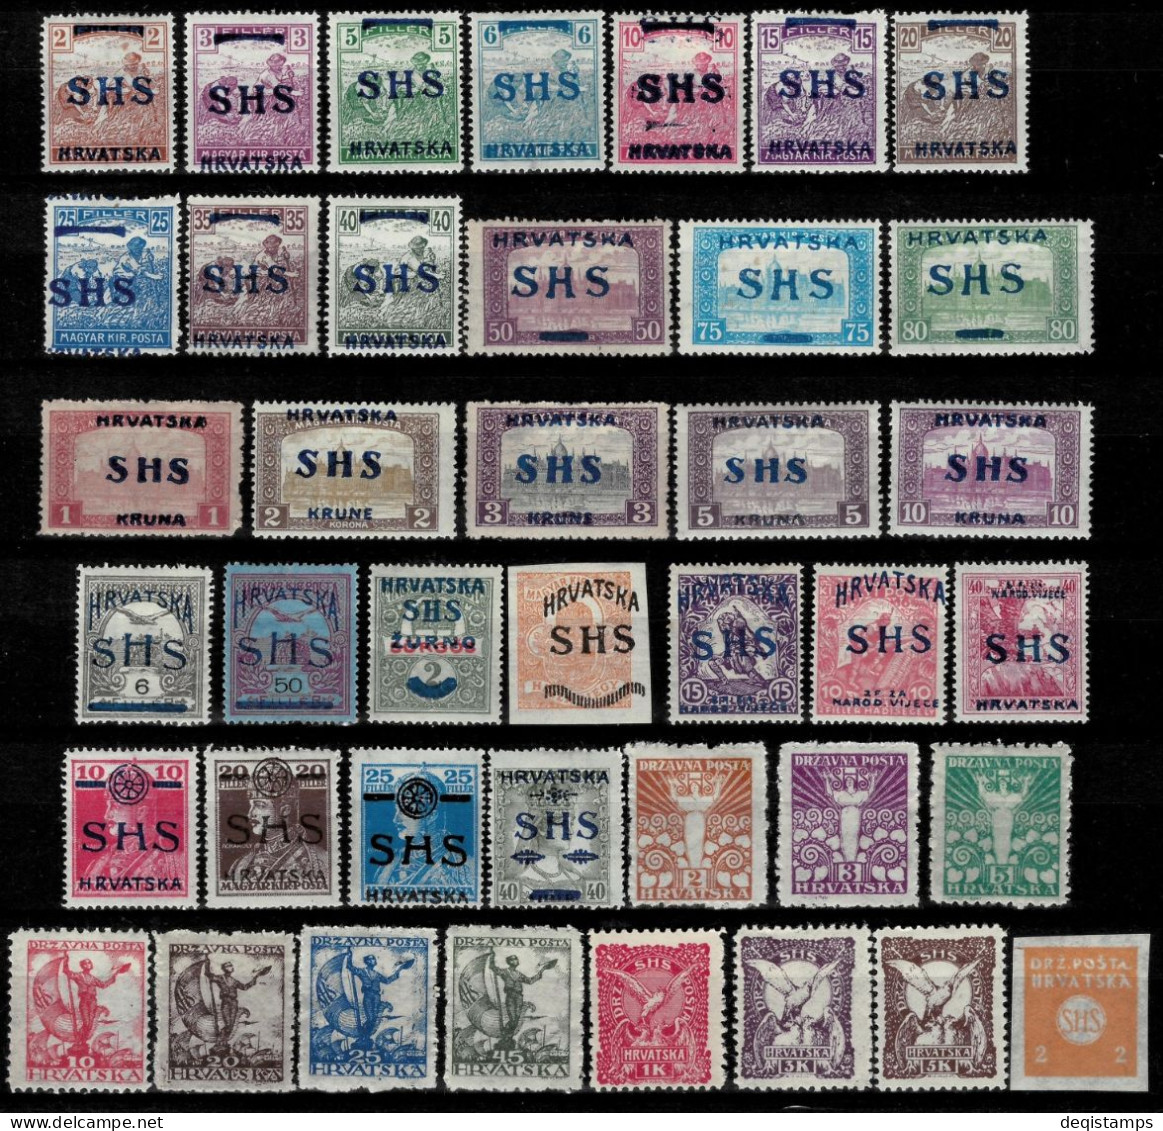 SHS - Croatia Stamps 1918/19  Hungary Stamps Overprinted  MH Sets - Unused Stamps